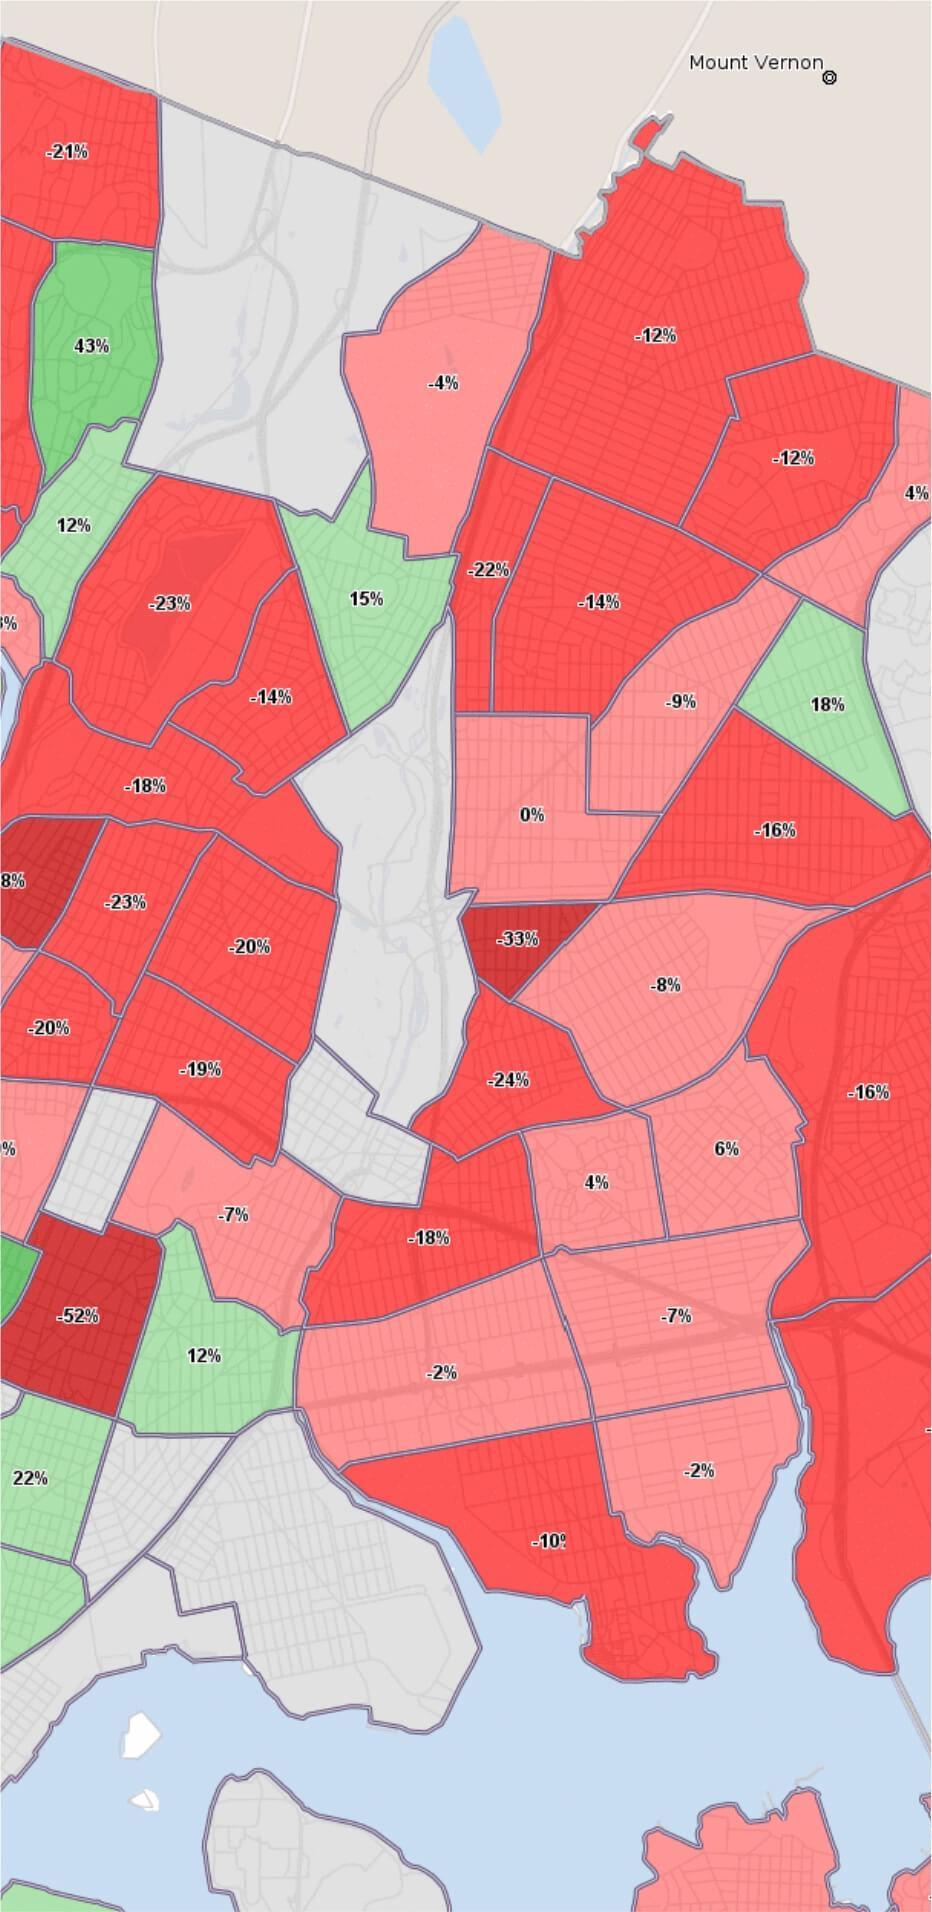 Bronx Overview Home Price Changes by Neighborhood The map